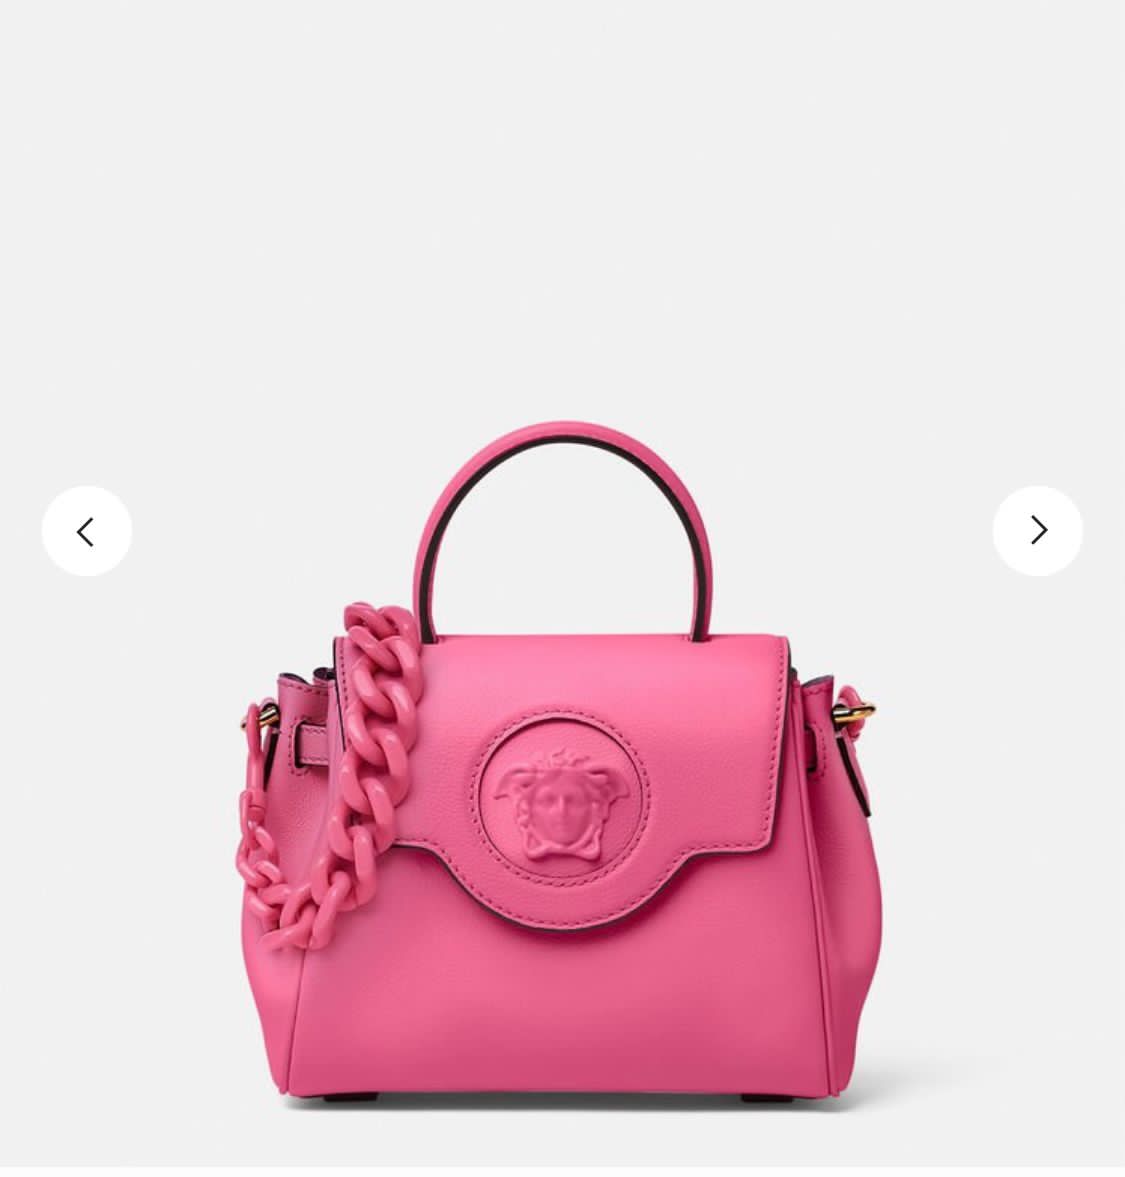 Versace Leather Tote Bag 17455 rose